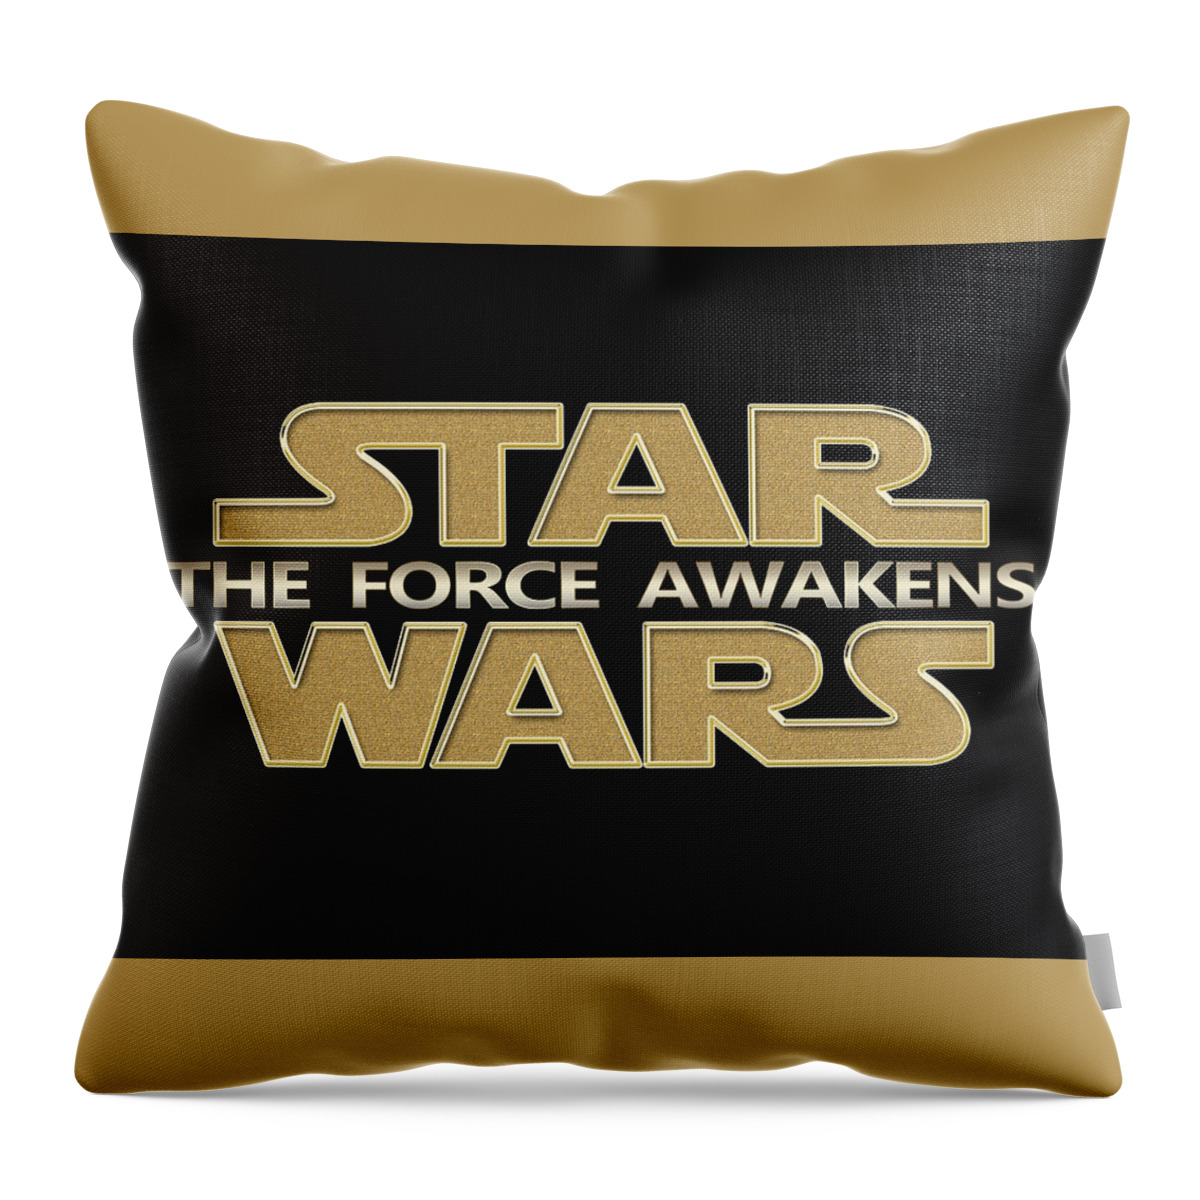 Star Wars Script Design Throw Pillow featuring the painting Star Wars The Force Awakens Carved Gold Typography digital art by Georgeta Blanaru